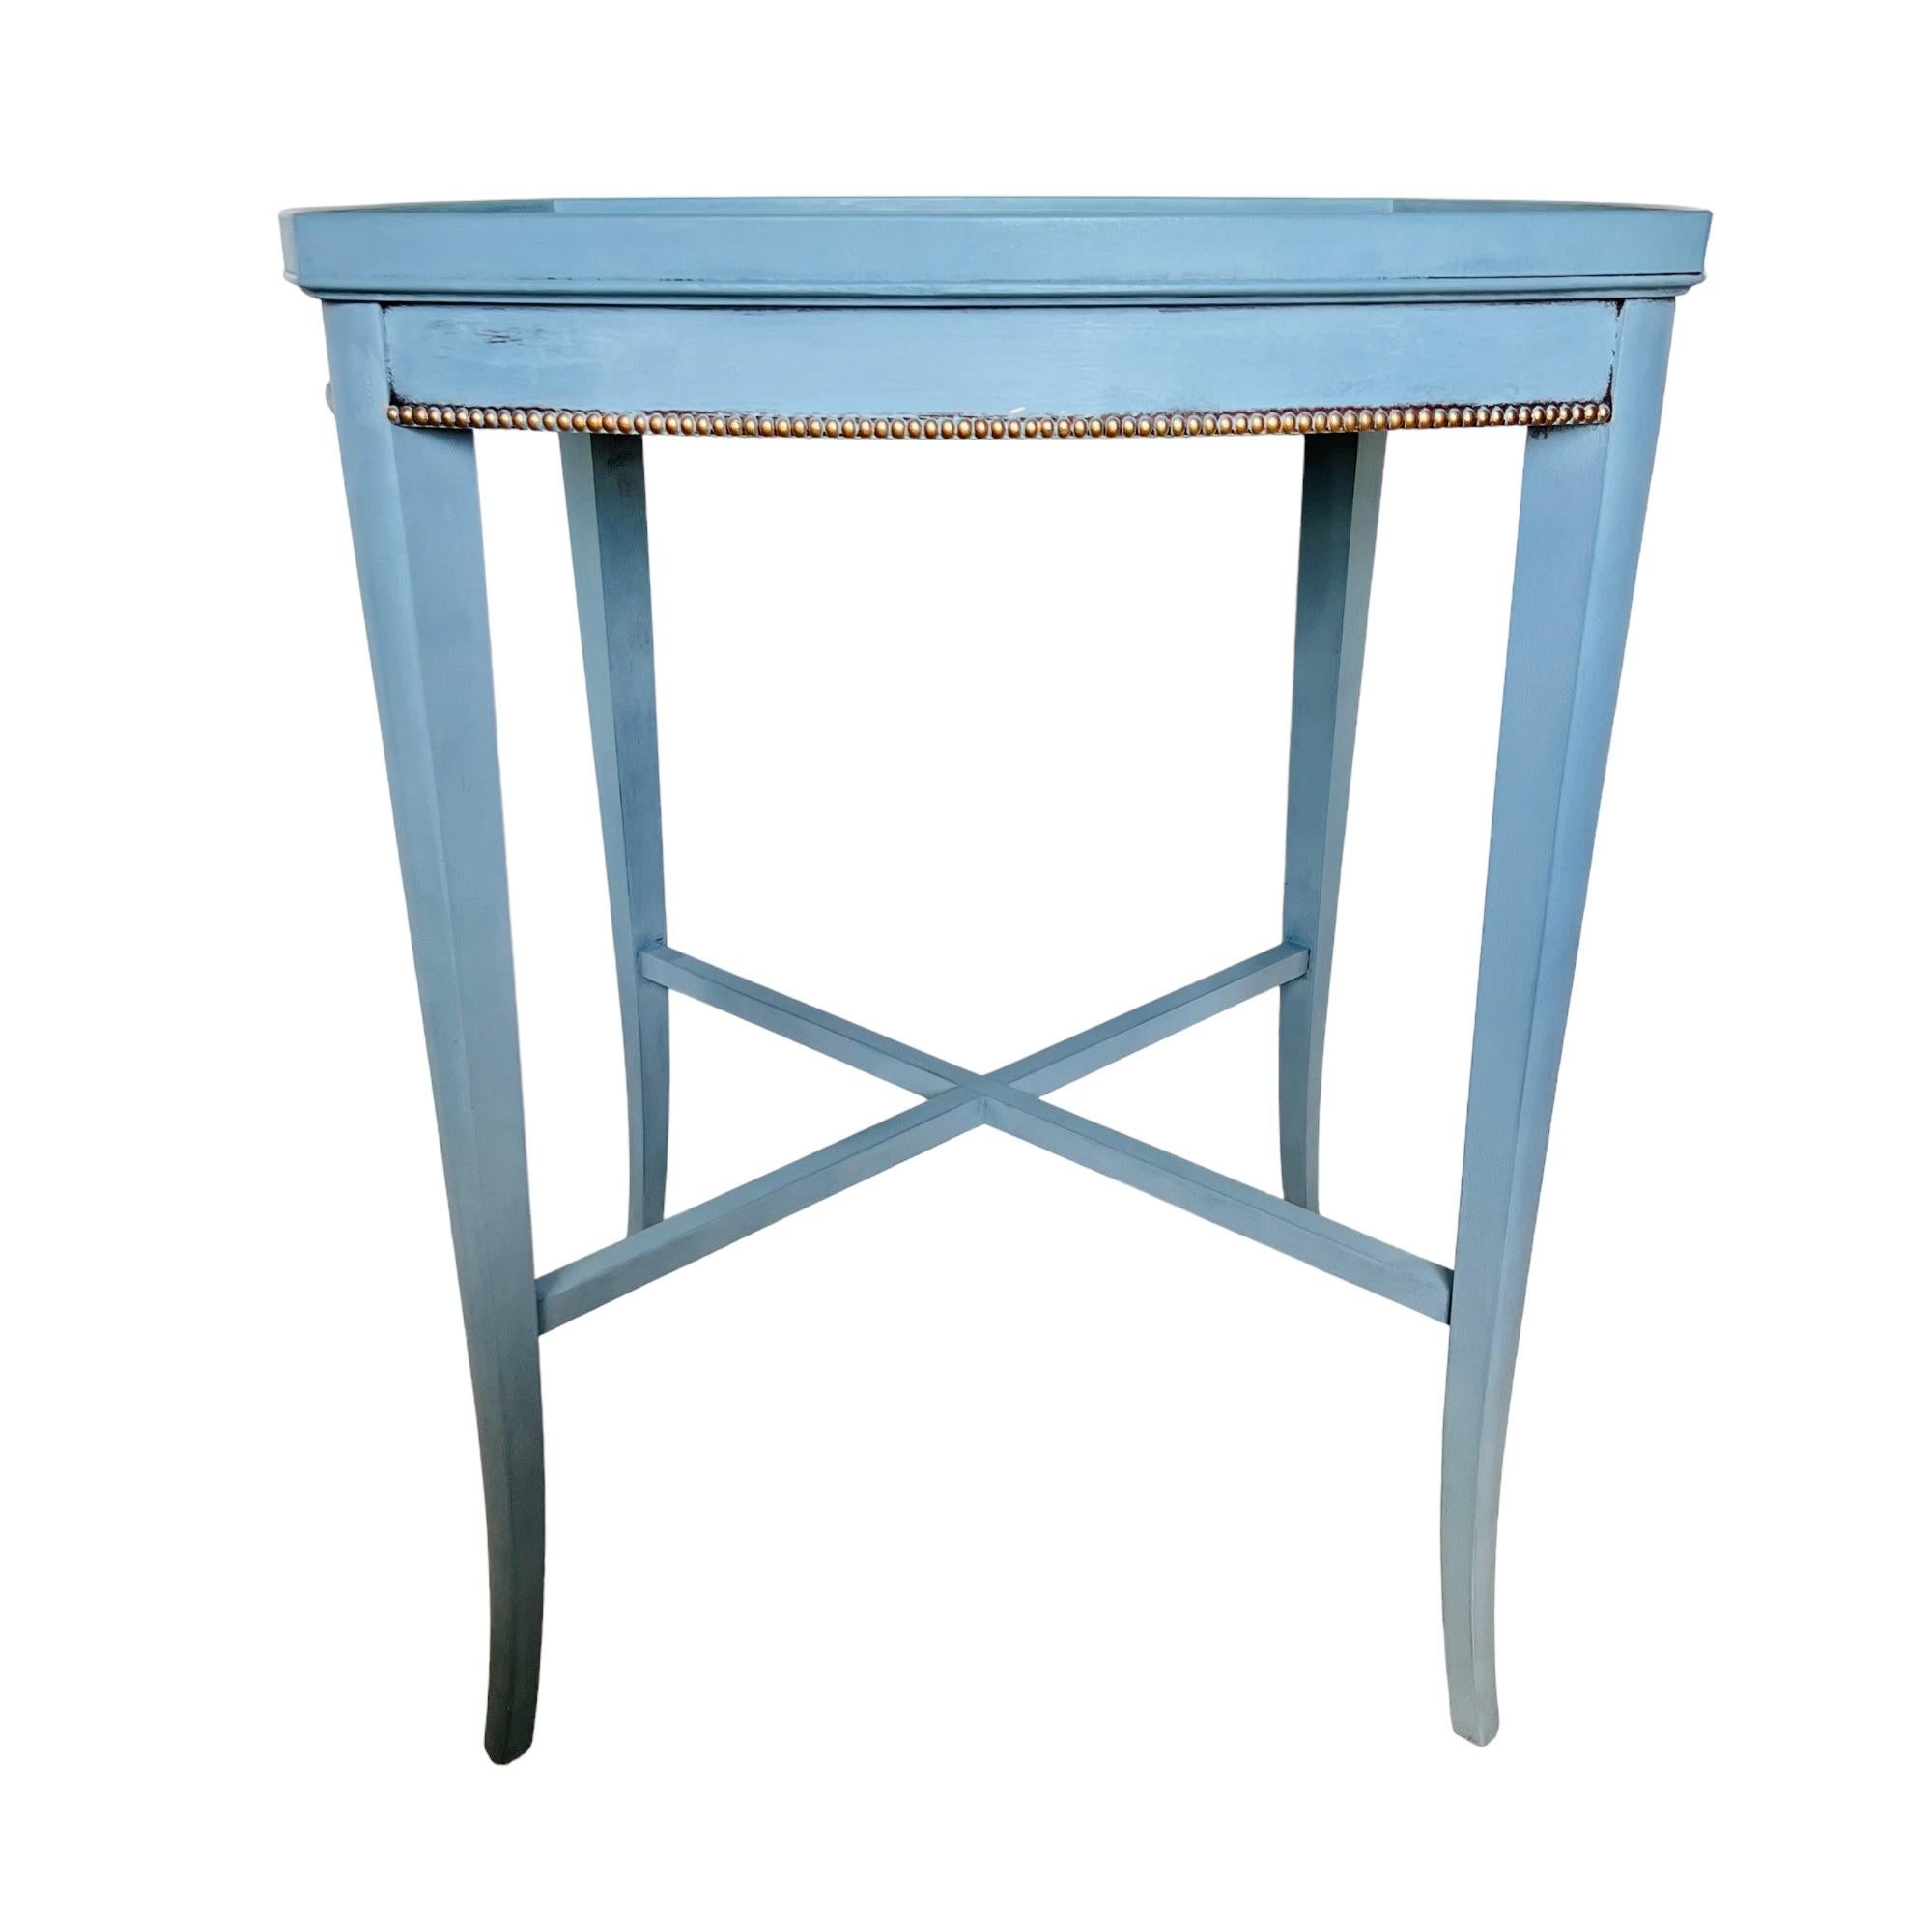 Elegant lines and fine details in a Classic color. This lovely vintage 1940s side table by Imperial Furniture of Grand Rapids has been refinished in French blue, accented with gold and has a slightly distressed look with the original mahogany finish